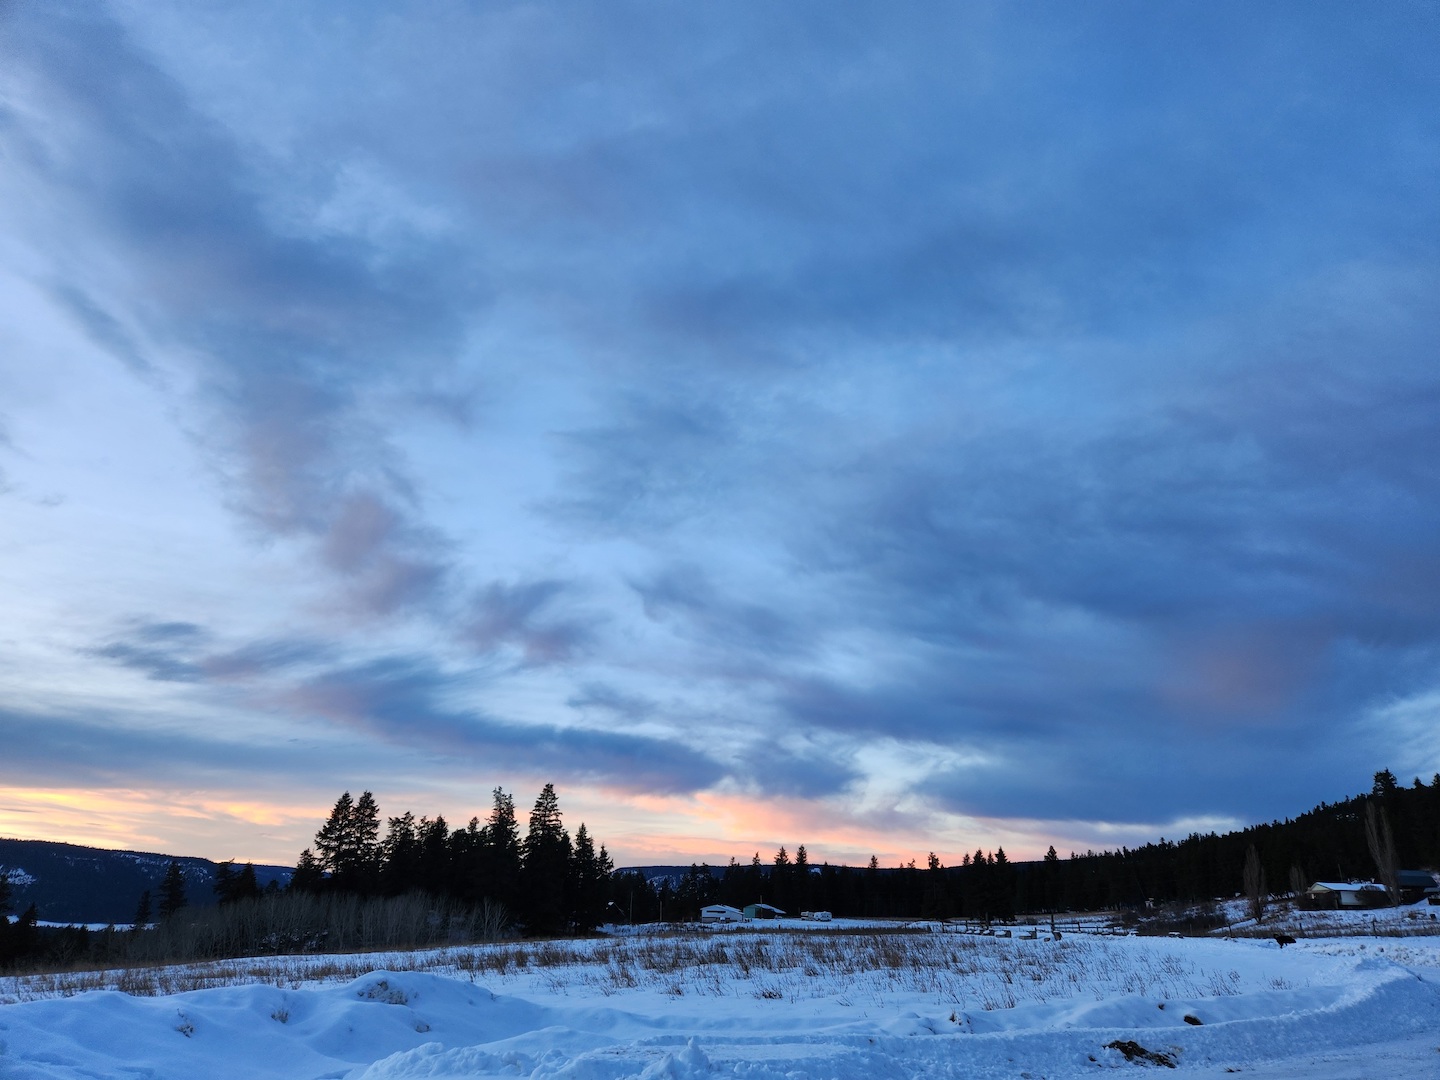 photo of a distance ranch across a snowy field, with sunset in a blue-grey low ceiling of clouds